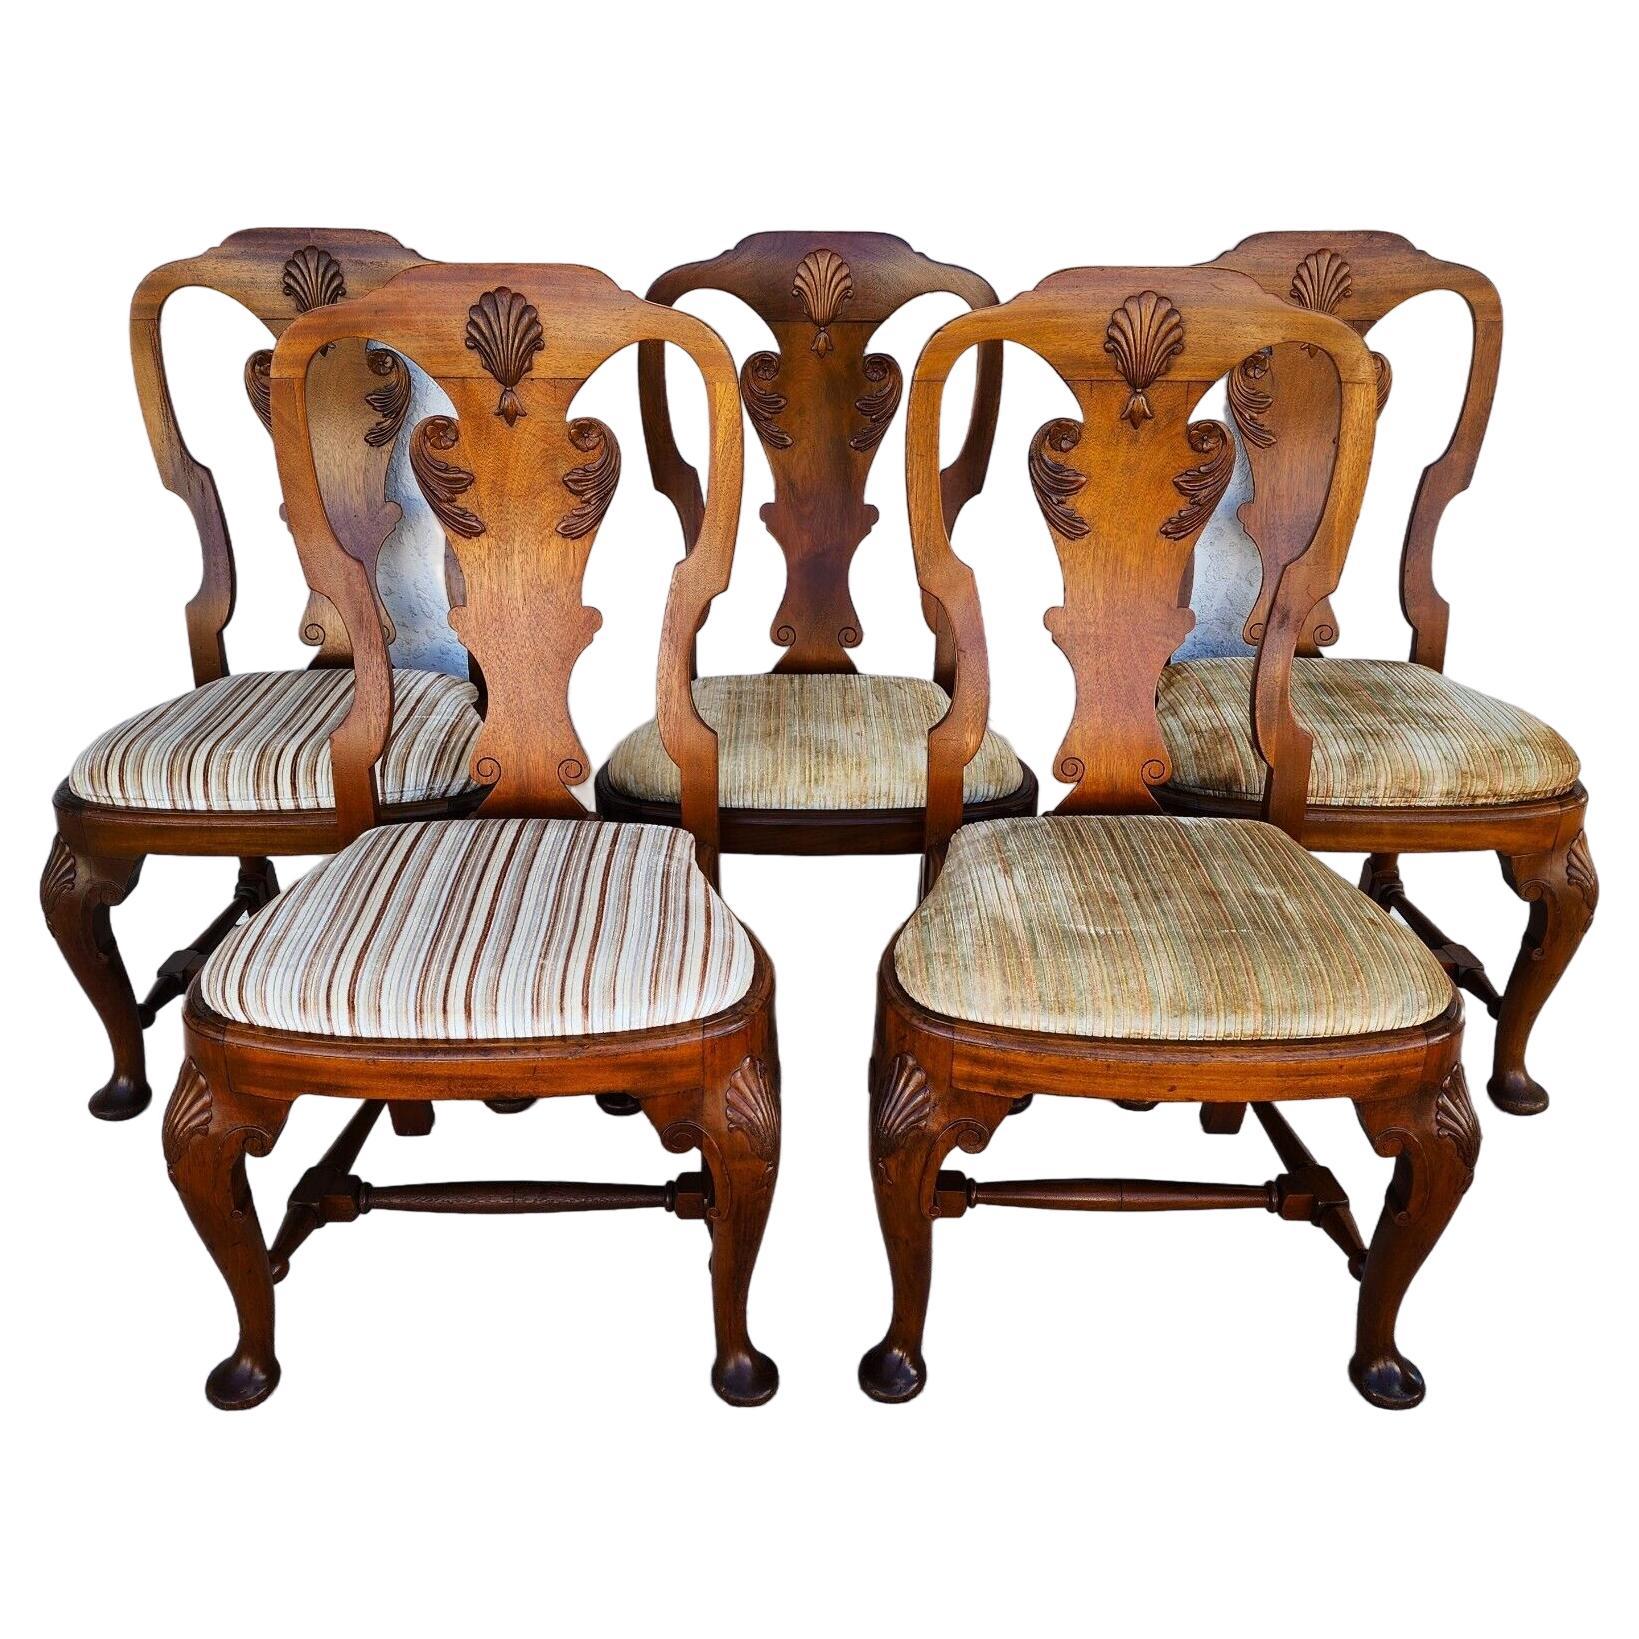 Antique Italian Georgian Dining Chairs Shell Walnut Set of 5 For Sale